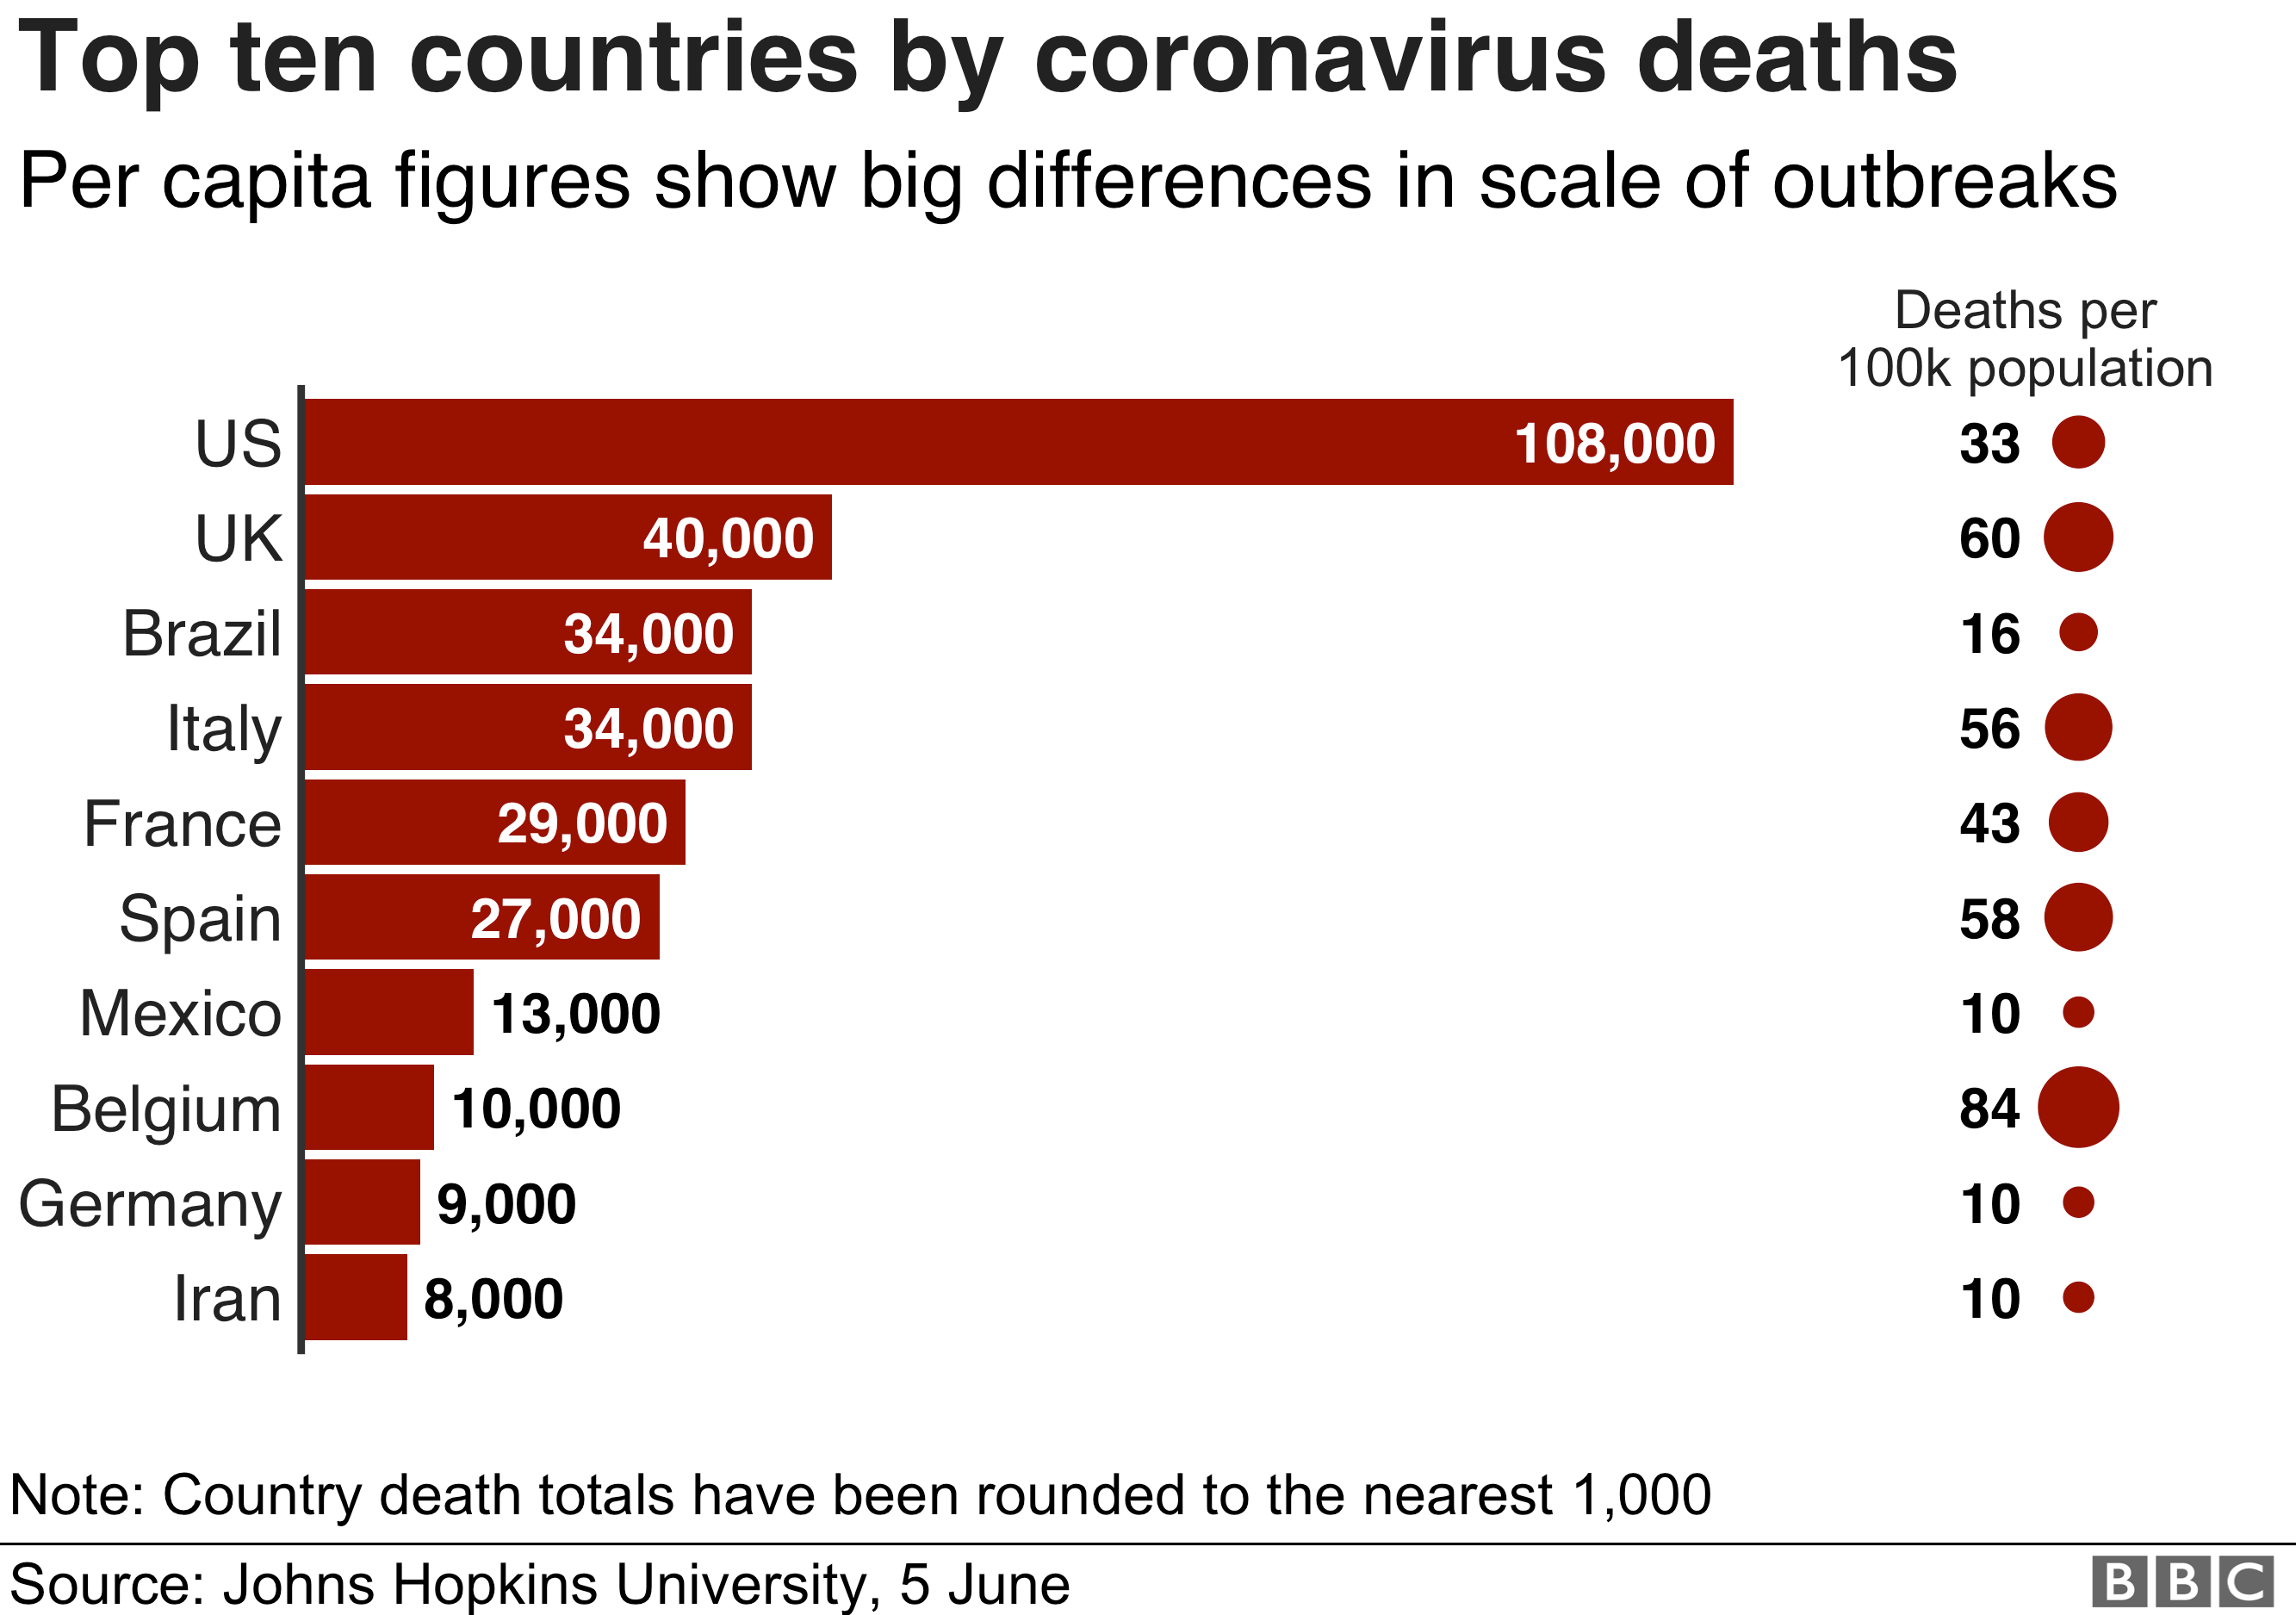 Graph showing top ten countries by coronavirus deaths